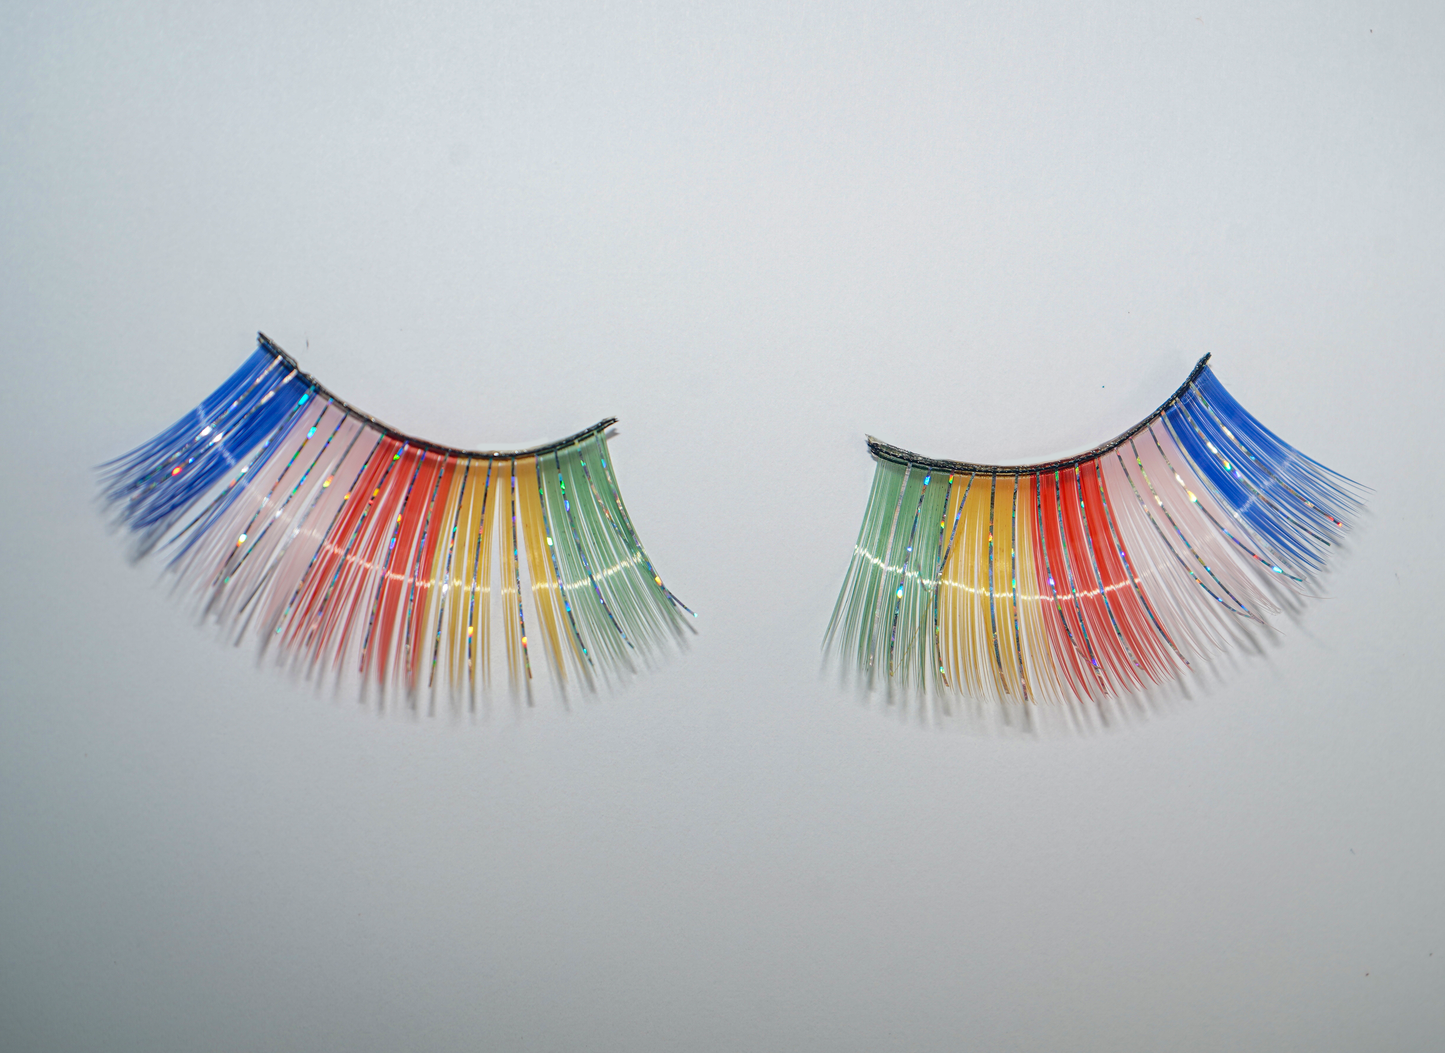 Rainbow Colored Lashes